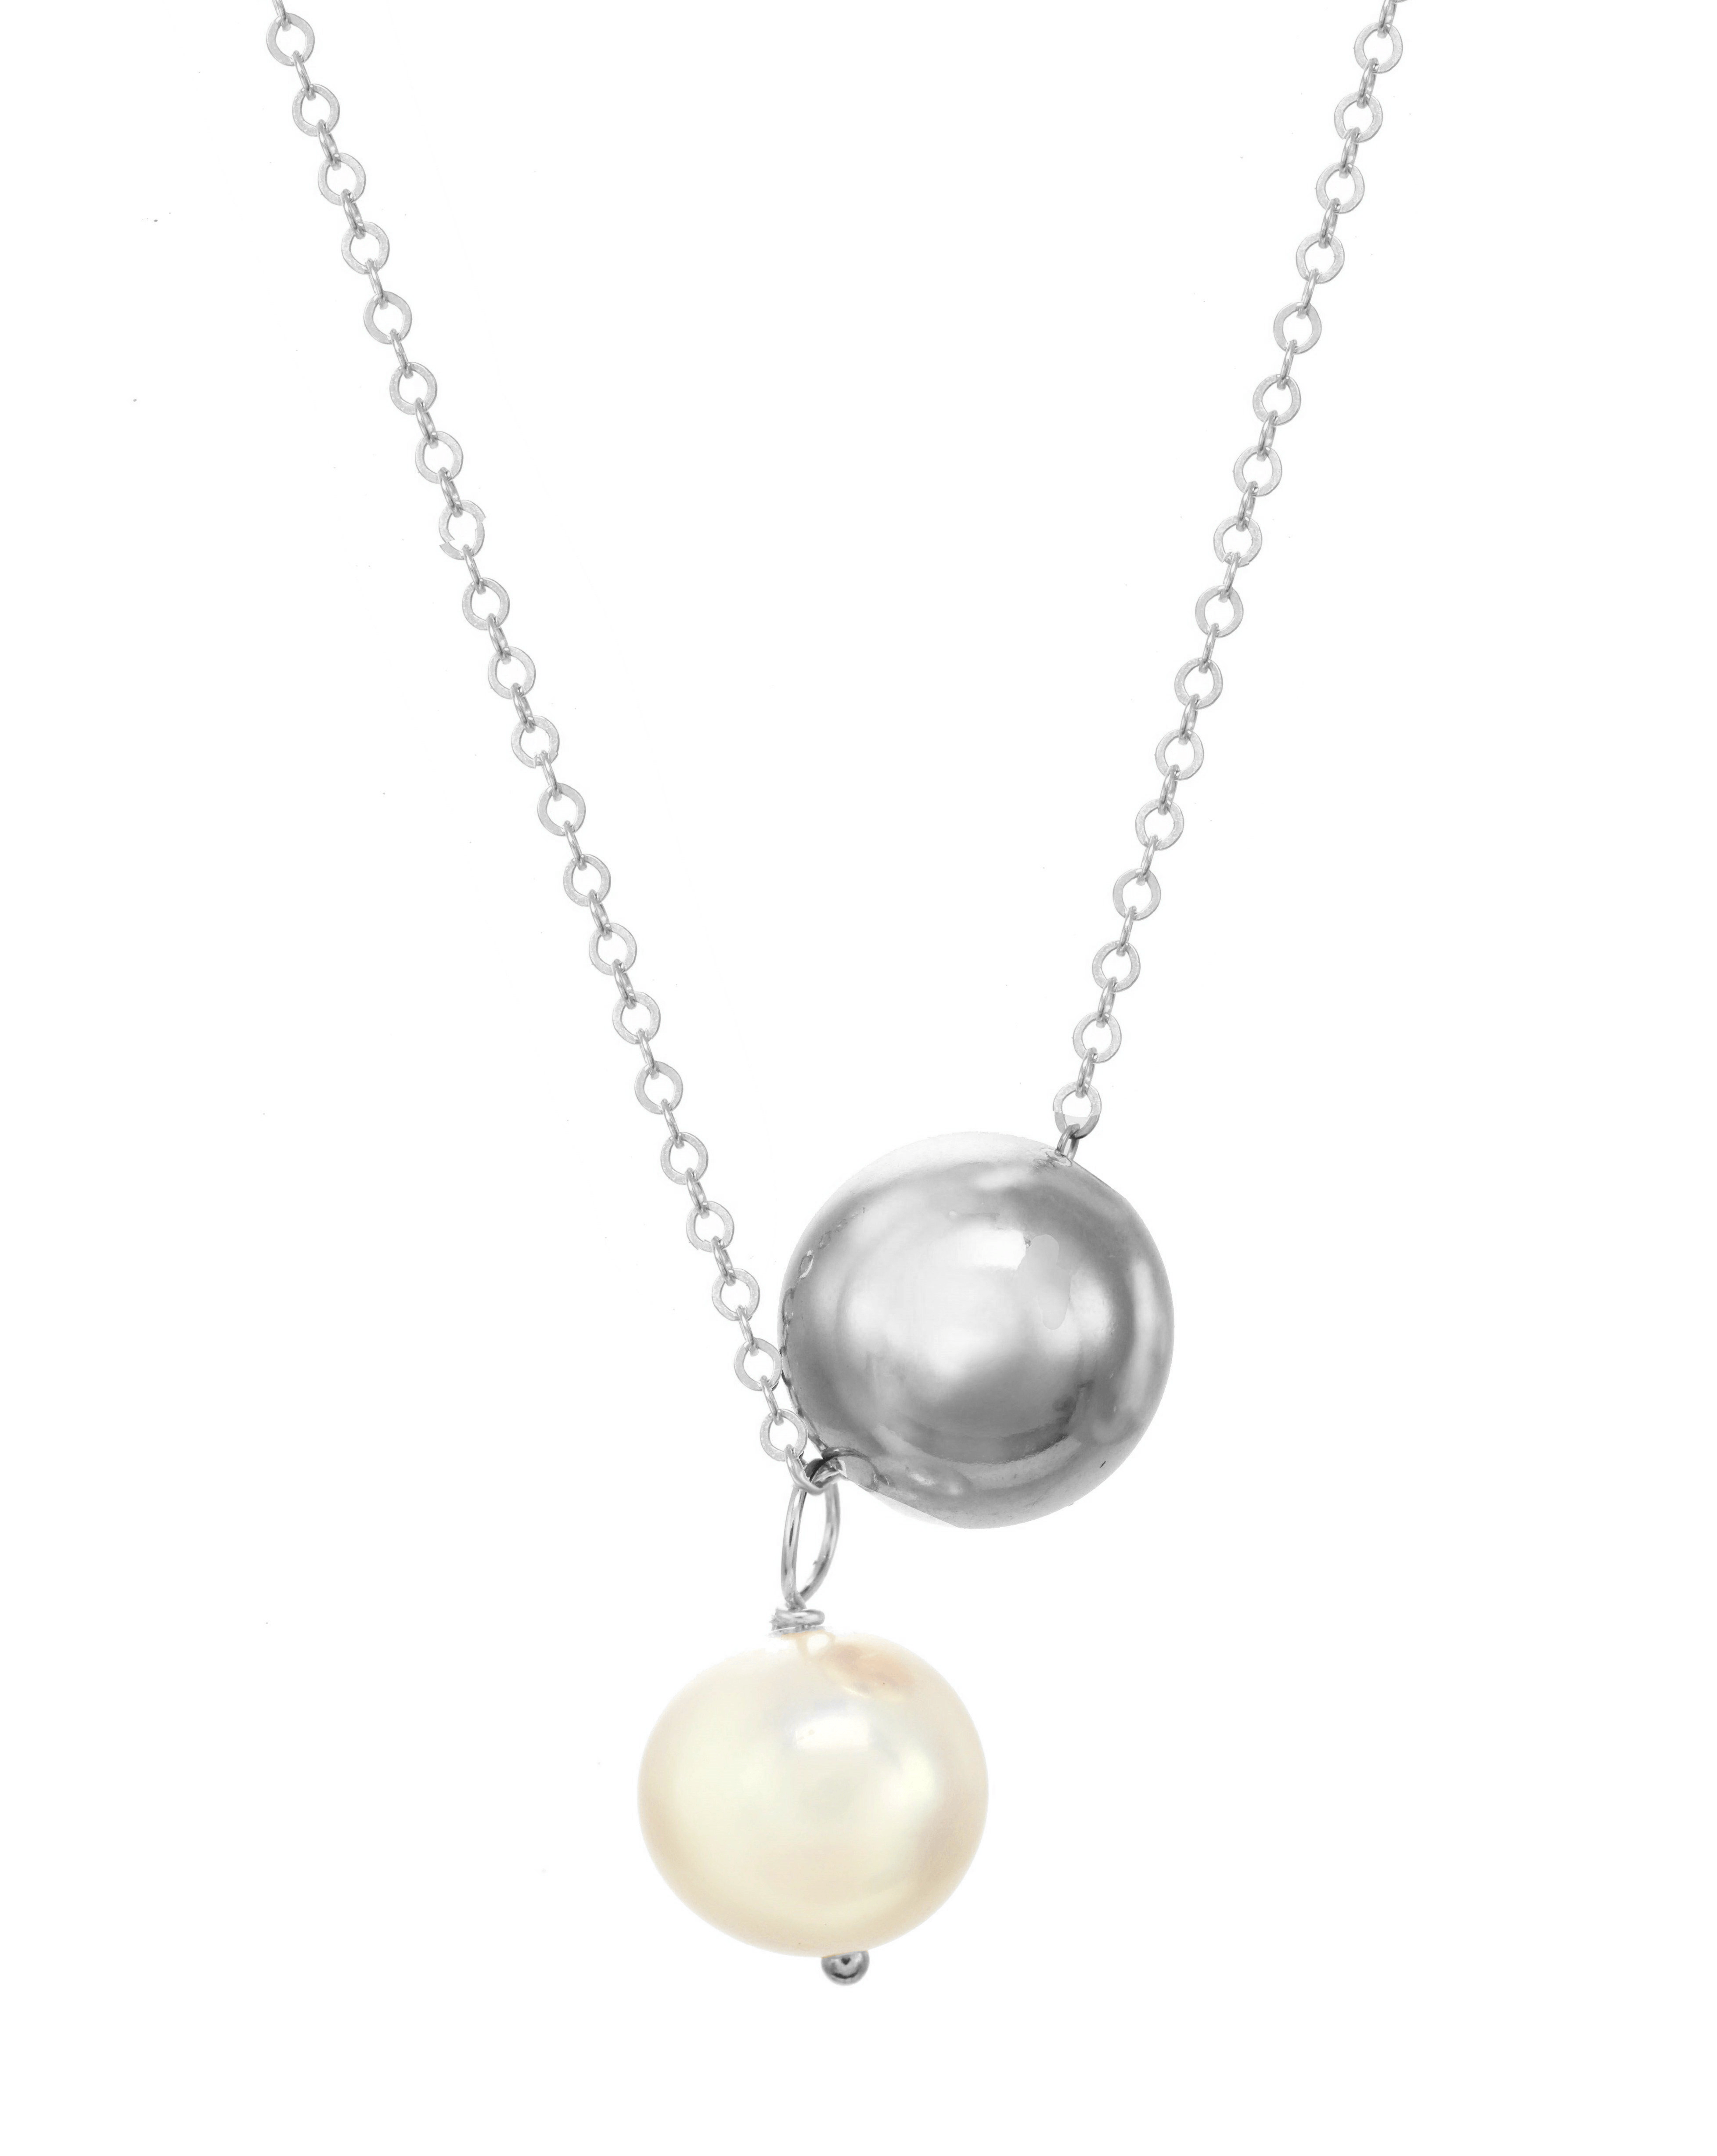 Lark Necklace by KOZAKH. A 16 to 18 inch adjustable length necklace, crafted in Sterling Silver, featuring an 8mm white freshwater pearl and a seamless silver bead.